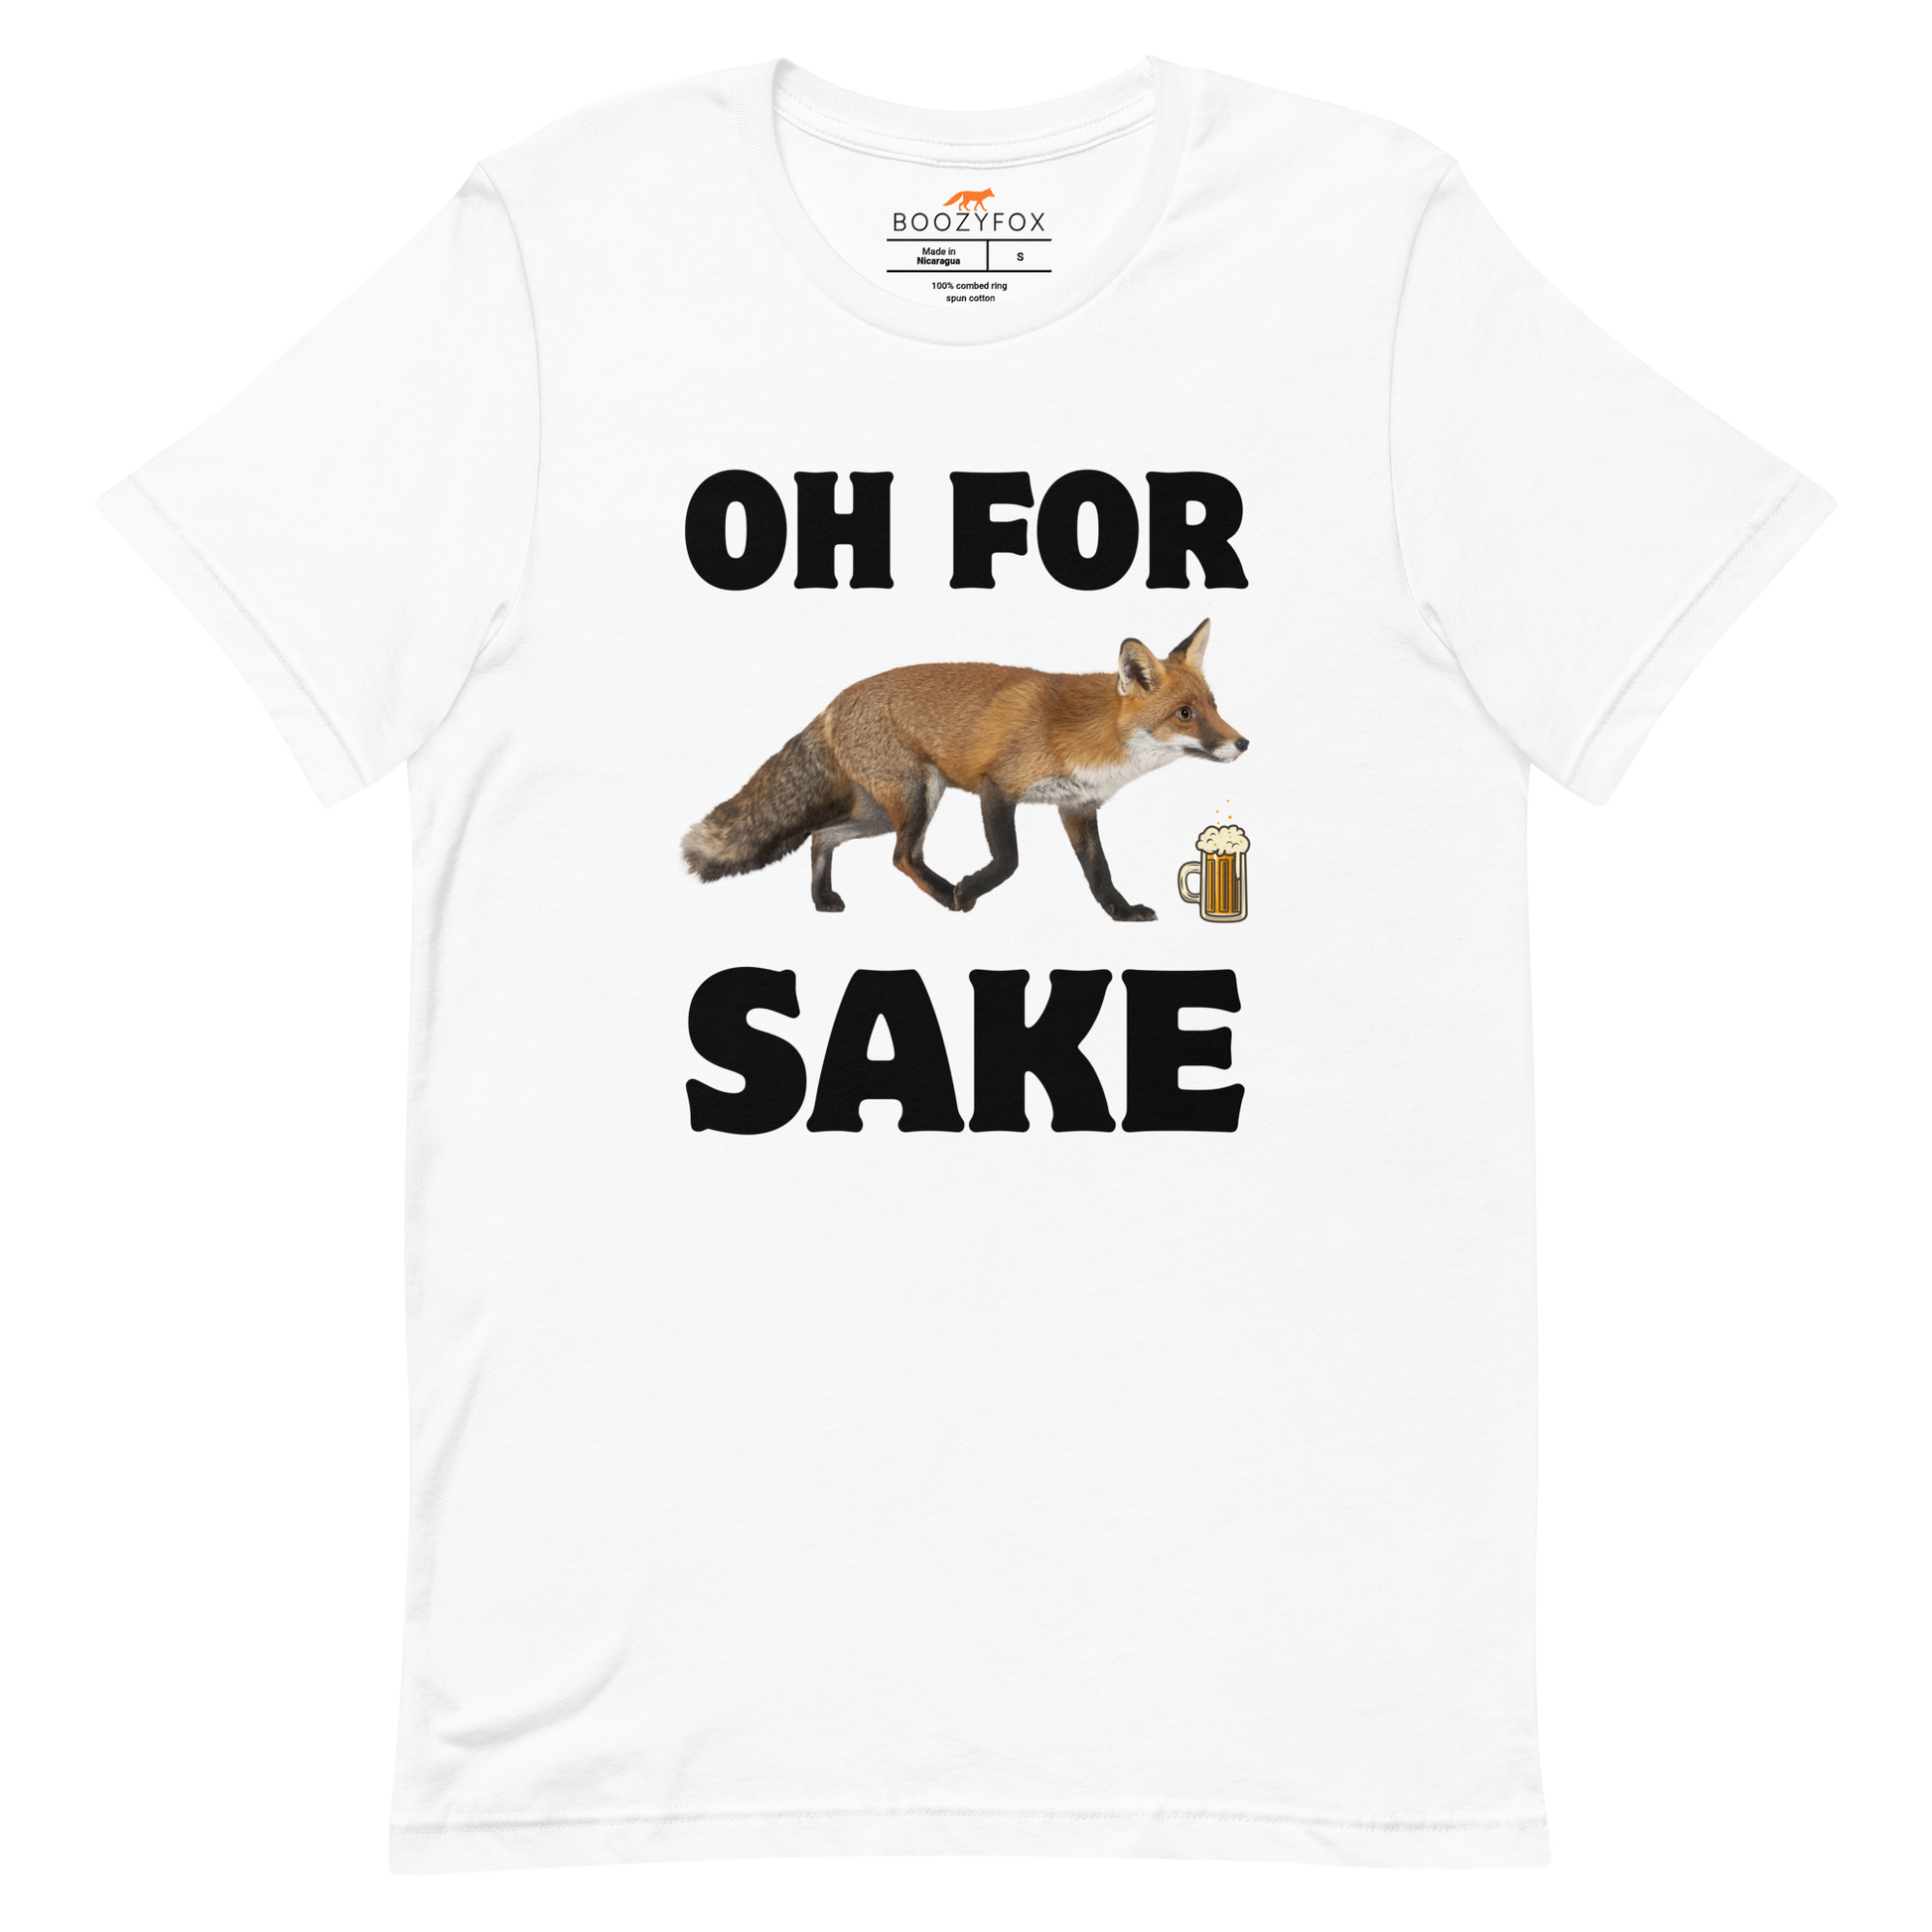 White Premium Fox T-Shirt featuring a Oh For Fox Sake graphic on the chest - Funny Graphic Fox Tees - Boozy Fox